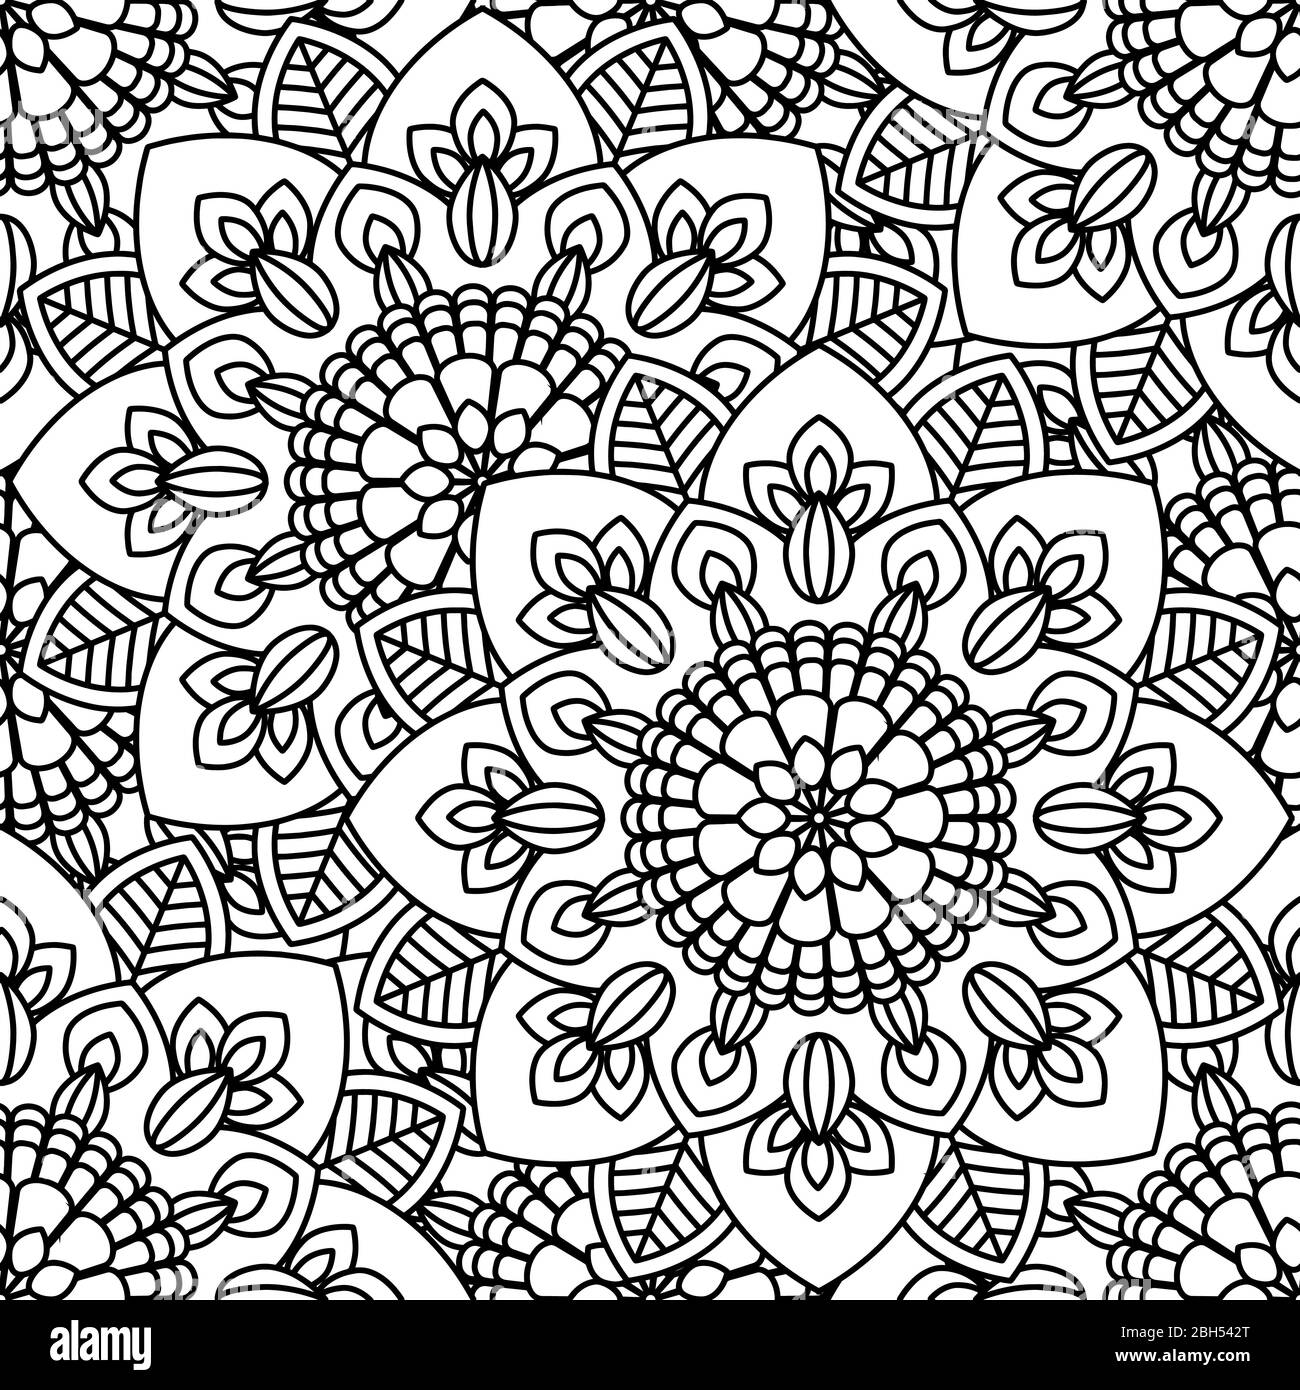 Mandala ethnic seamless pattern. Adult coloring page. Black and white repeat pattern background. Vector illustration. Stock Vector